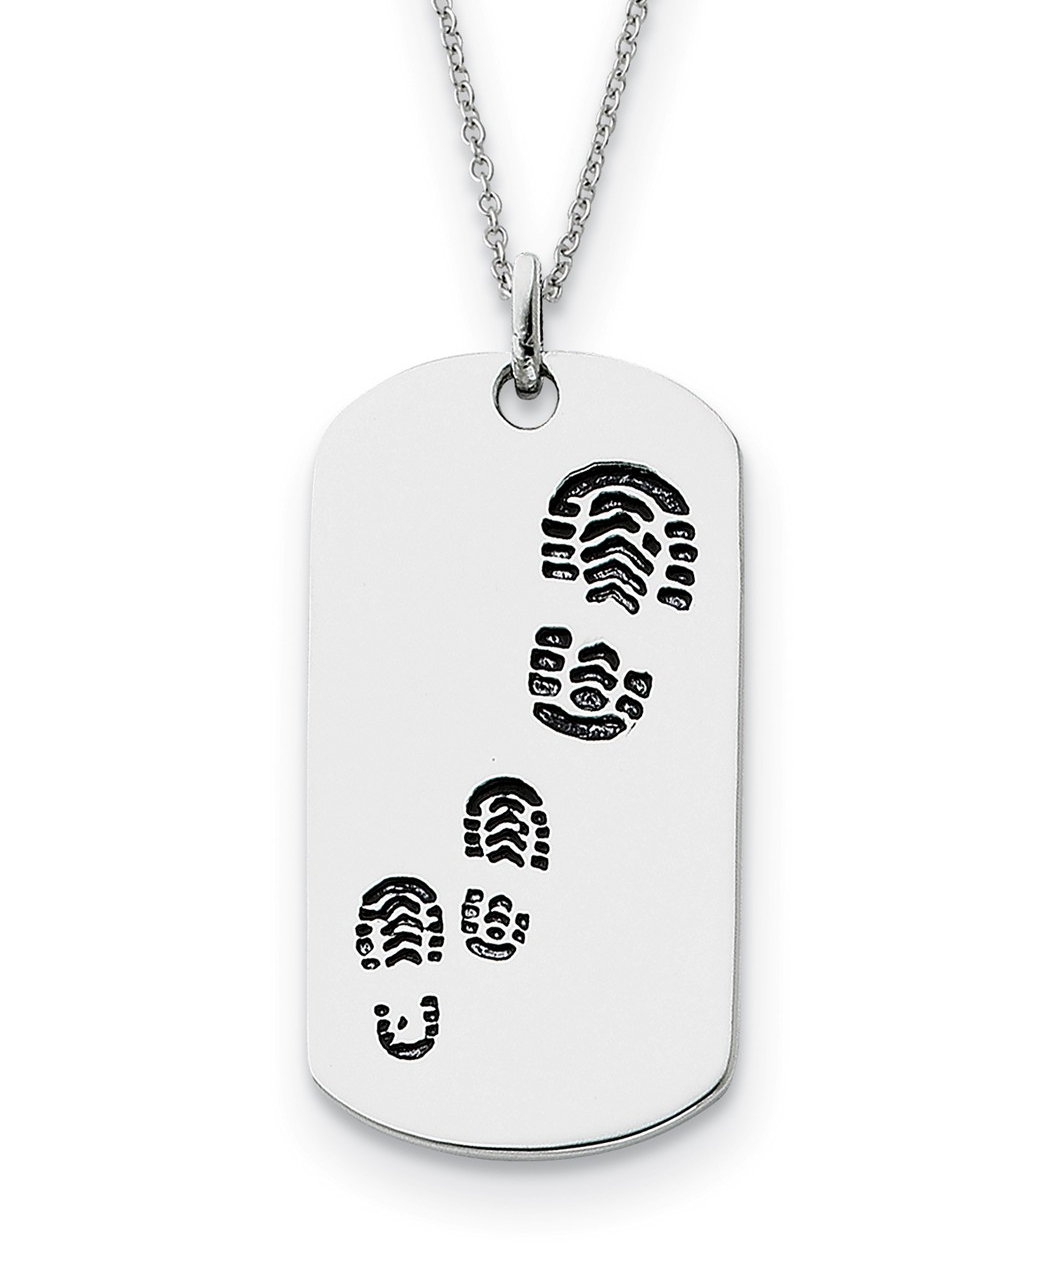 'Footsteps' Rhodium-Plated Dog Tag Pendant Necklace, Antiqued Sterling Silver.